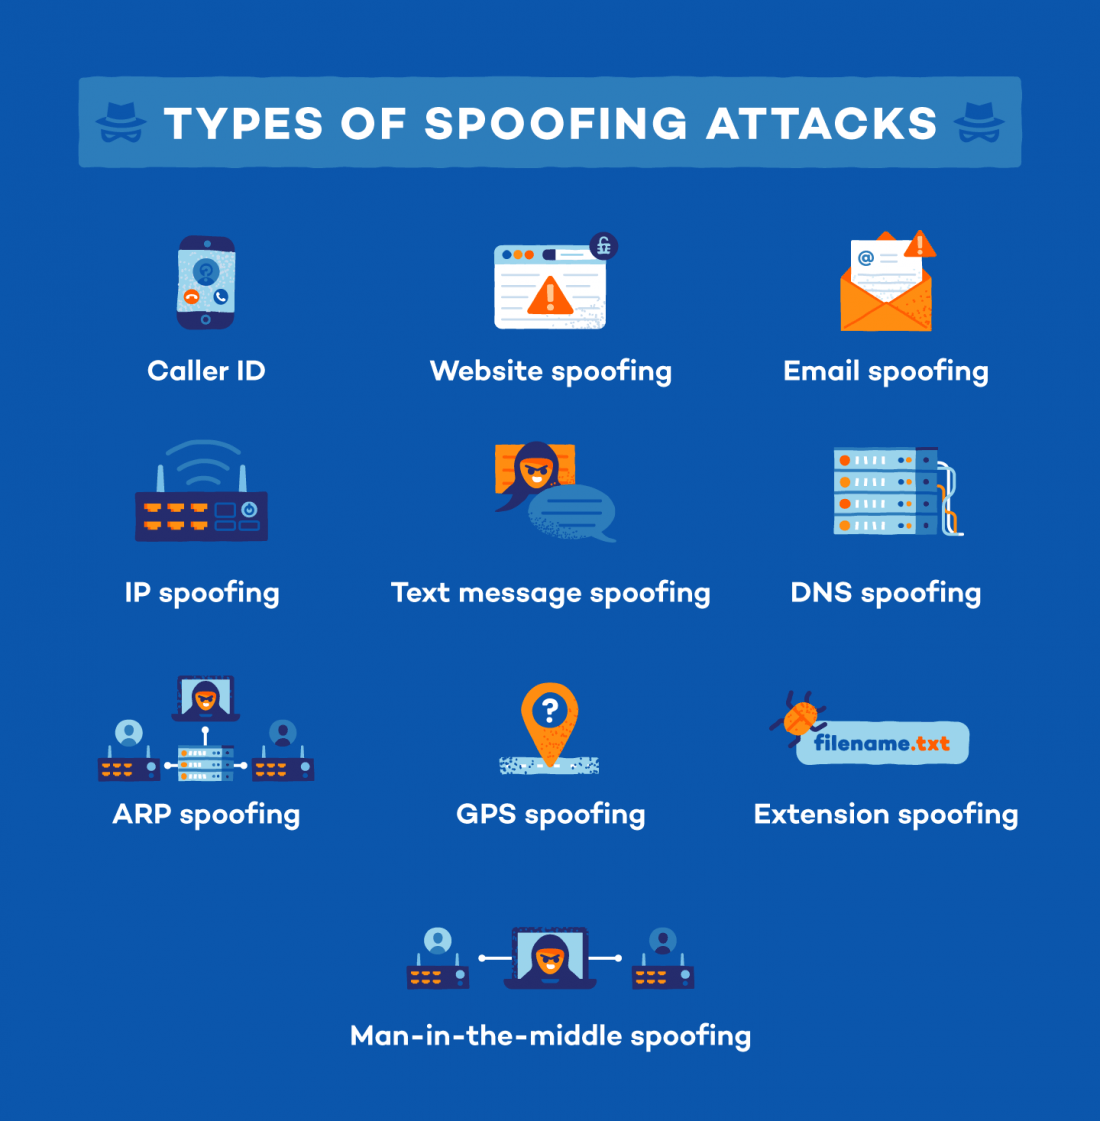 Different types of spoofing attacks